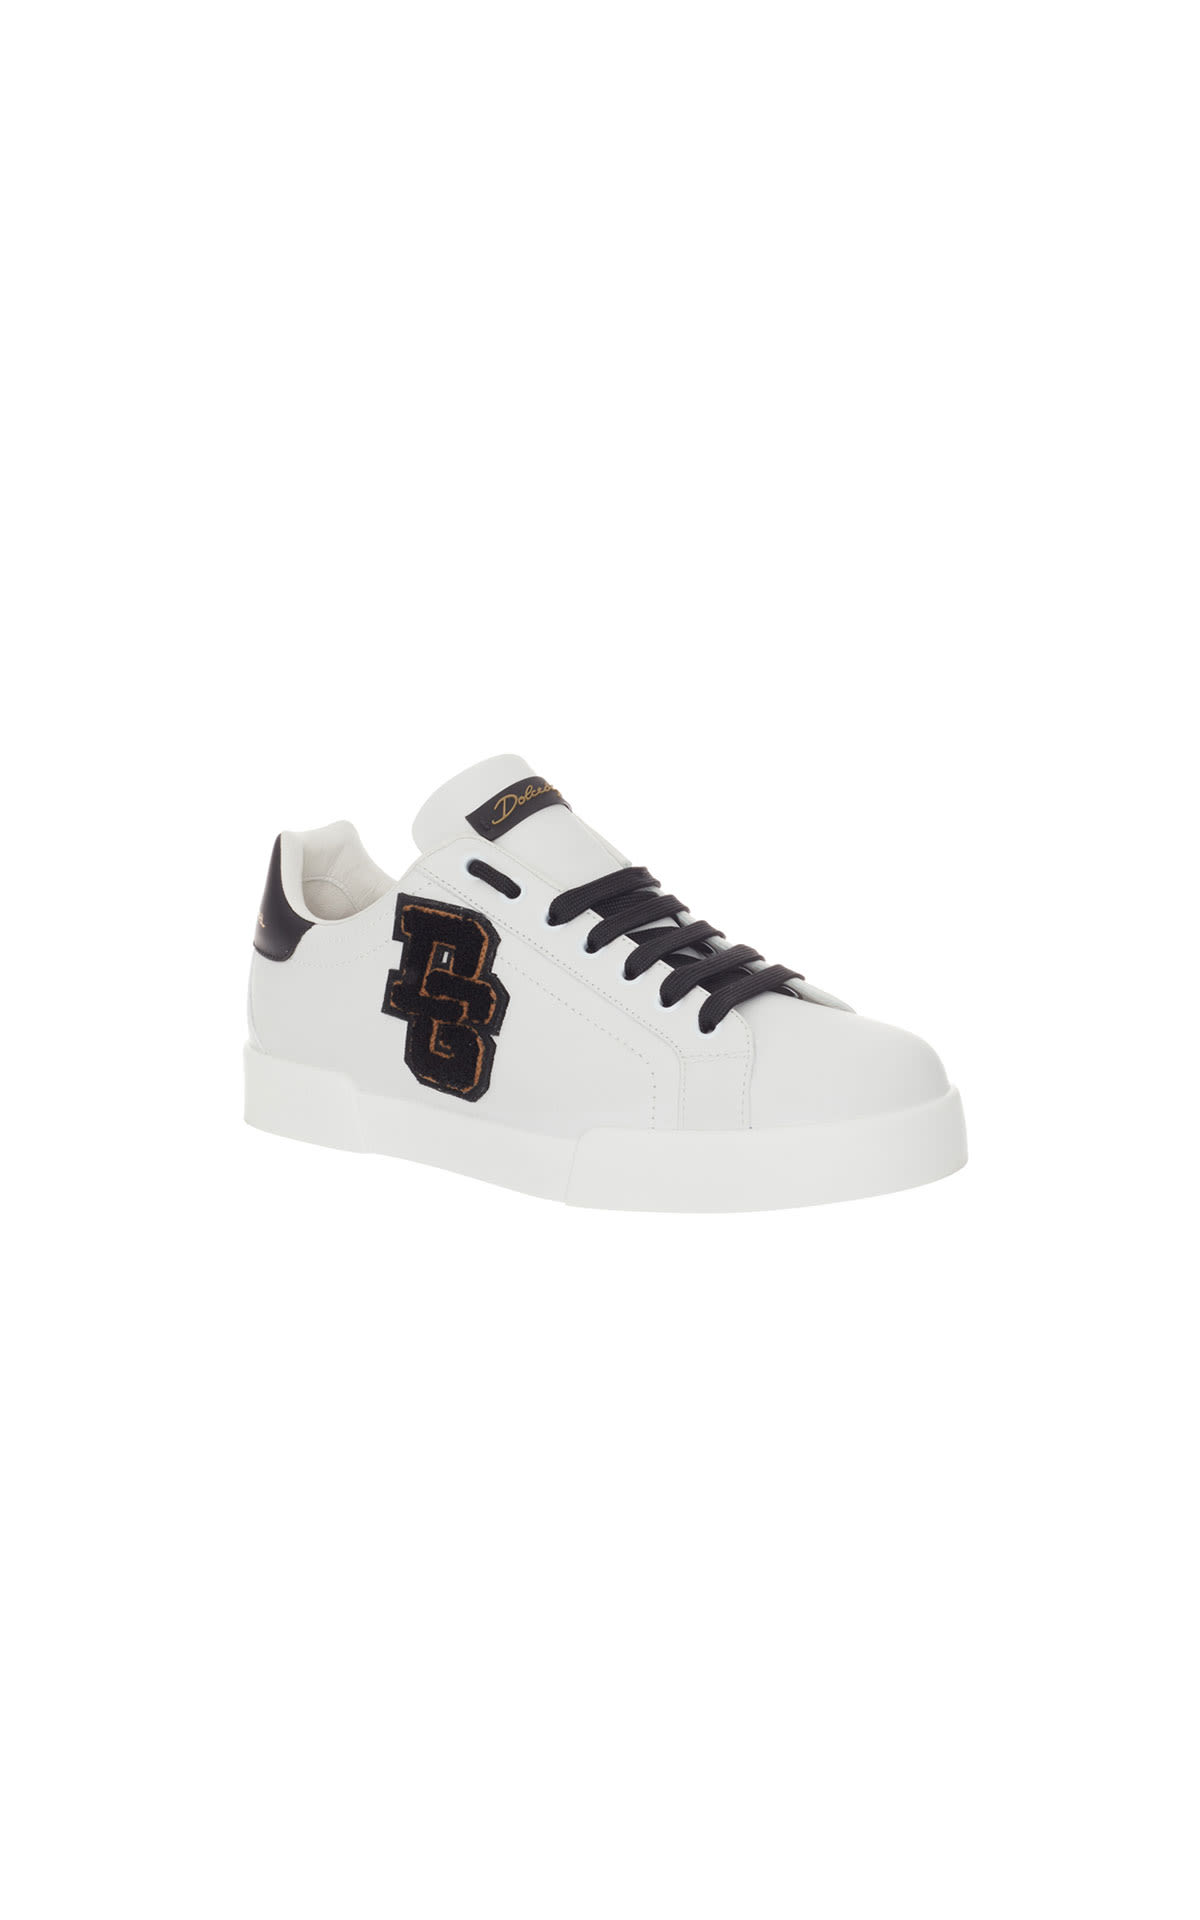 Dolce & Gabbana Logo low top sneaker from Bicester Village